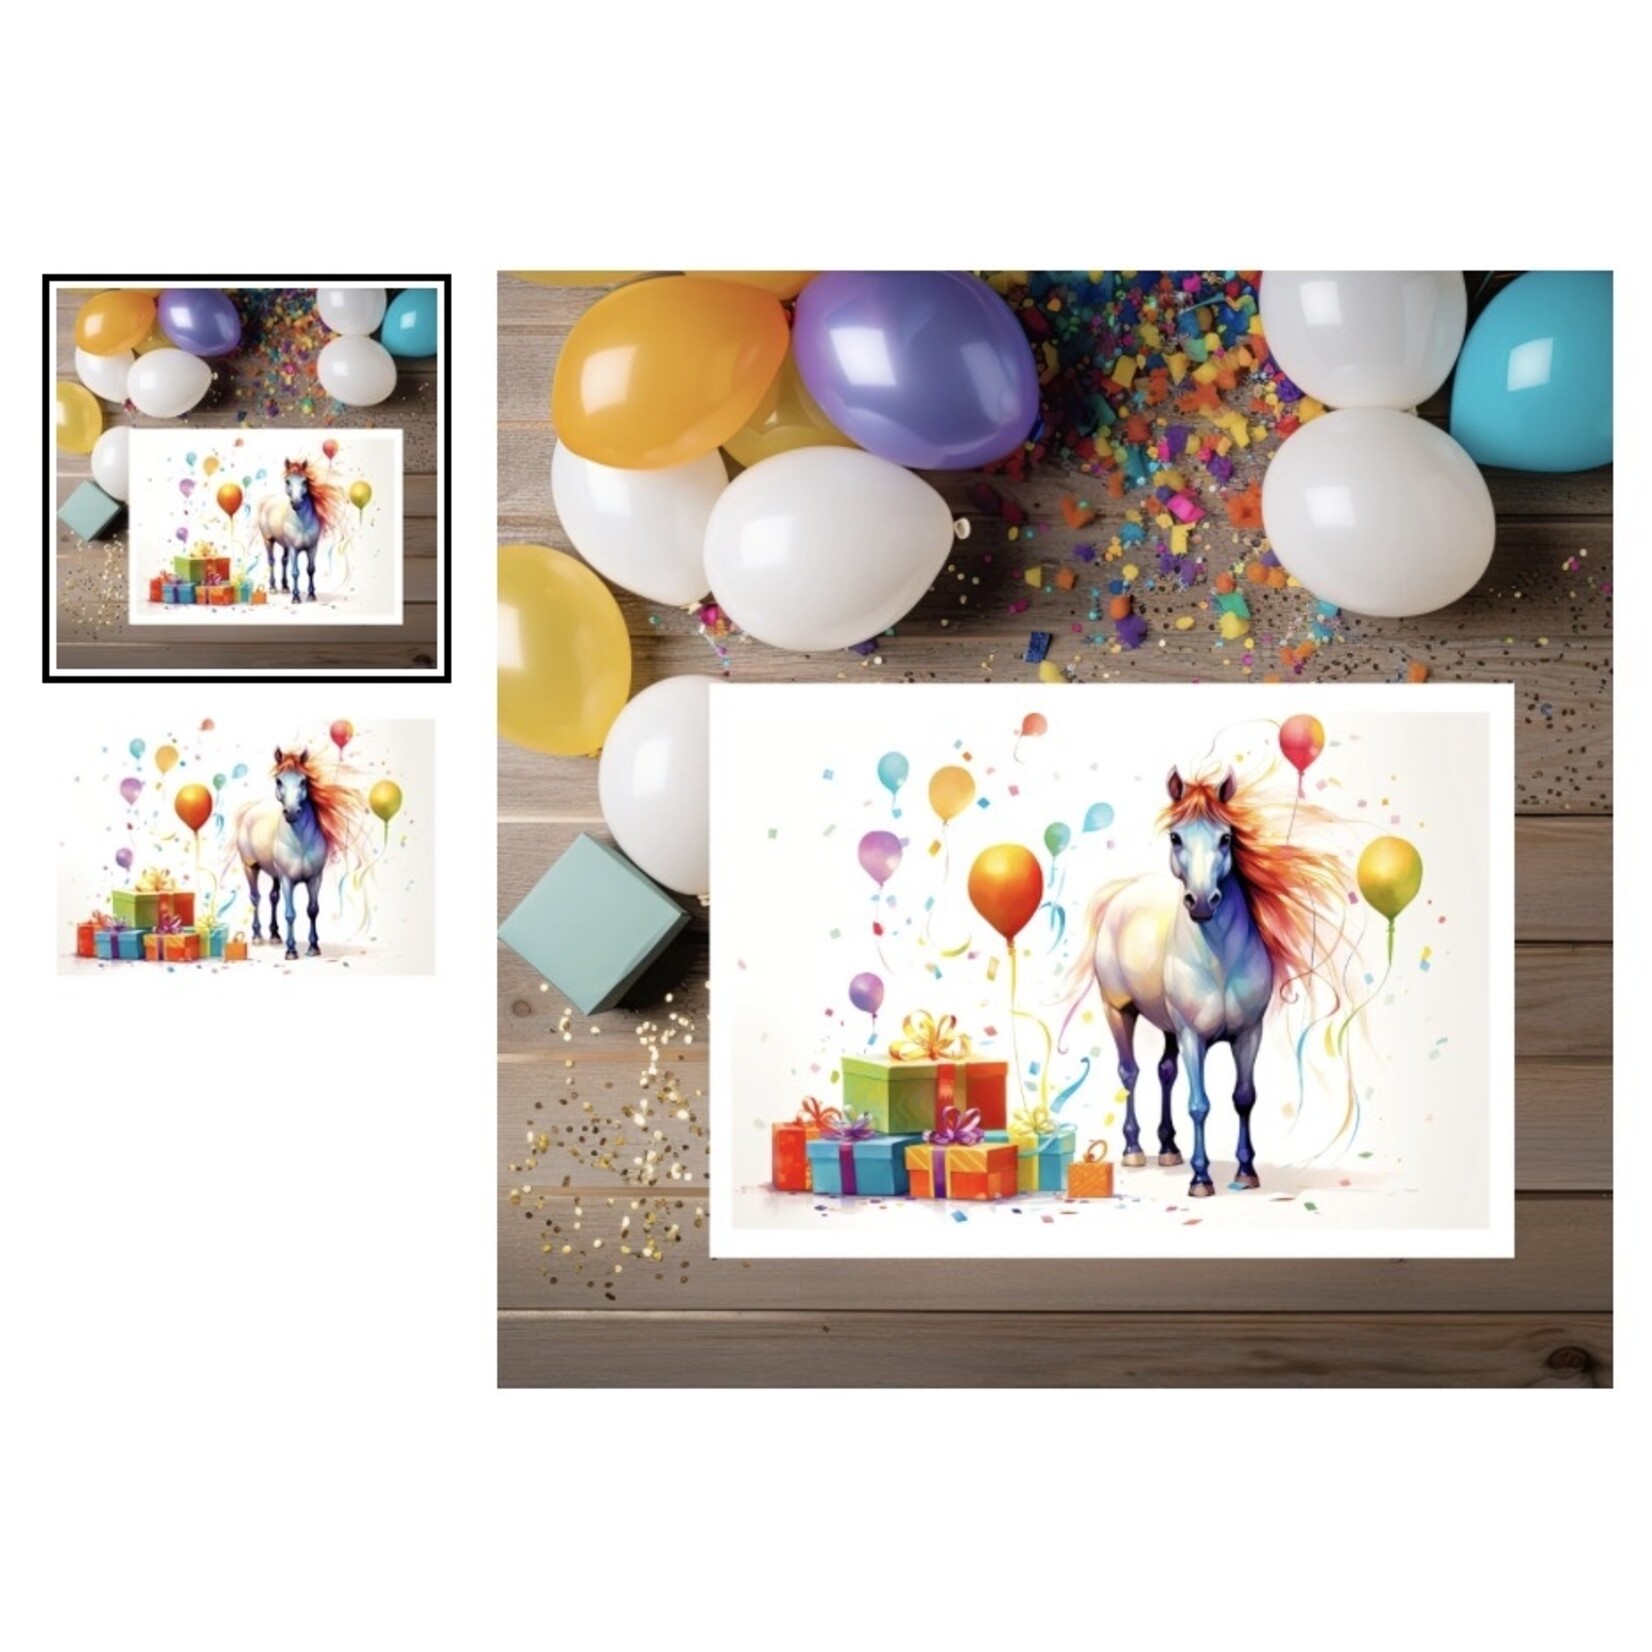 The Naughty Equestrian Hues of Happiness: Vibrant Horse Birthday Delight Greeting Card